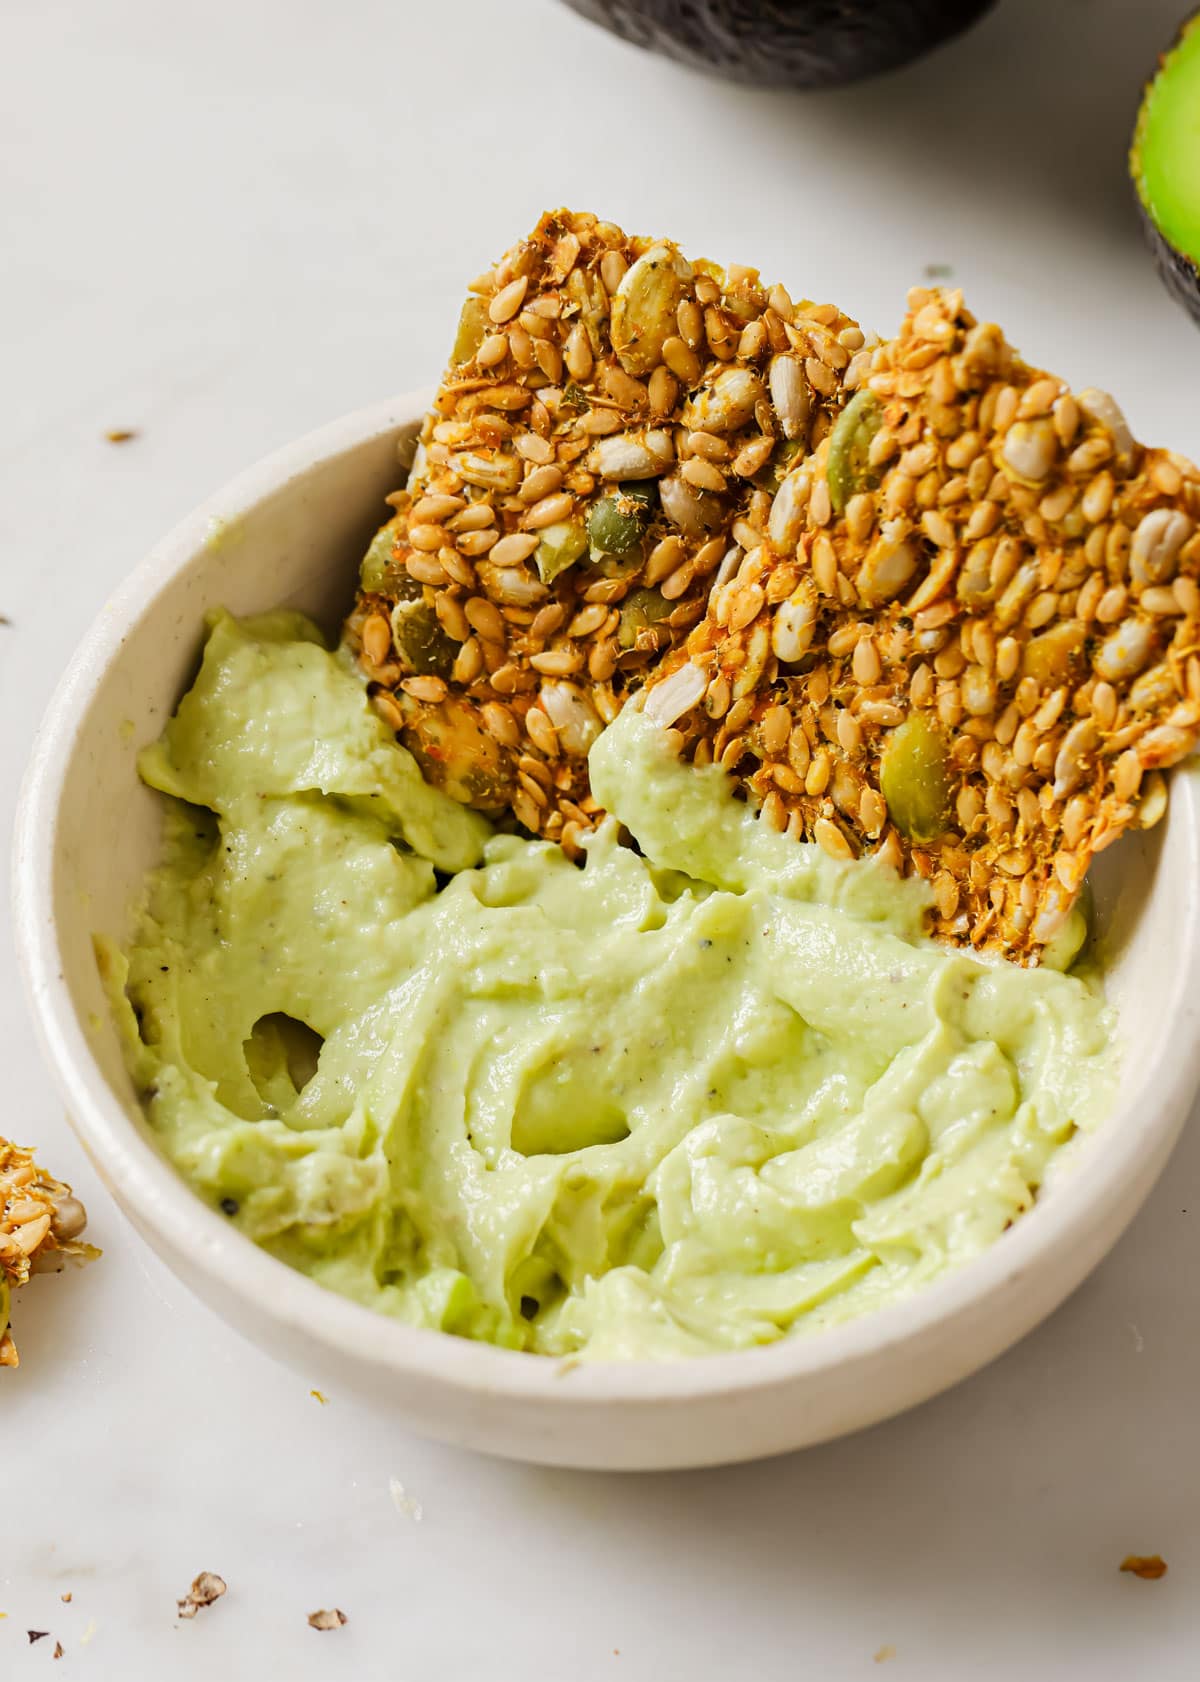 Seeded crackers with avocado spread.